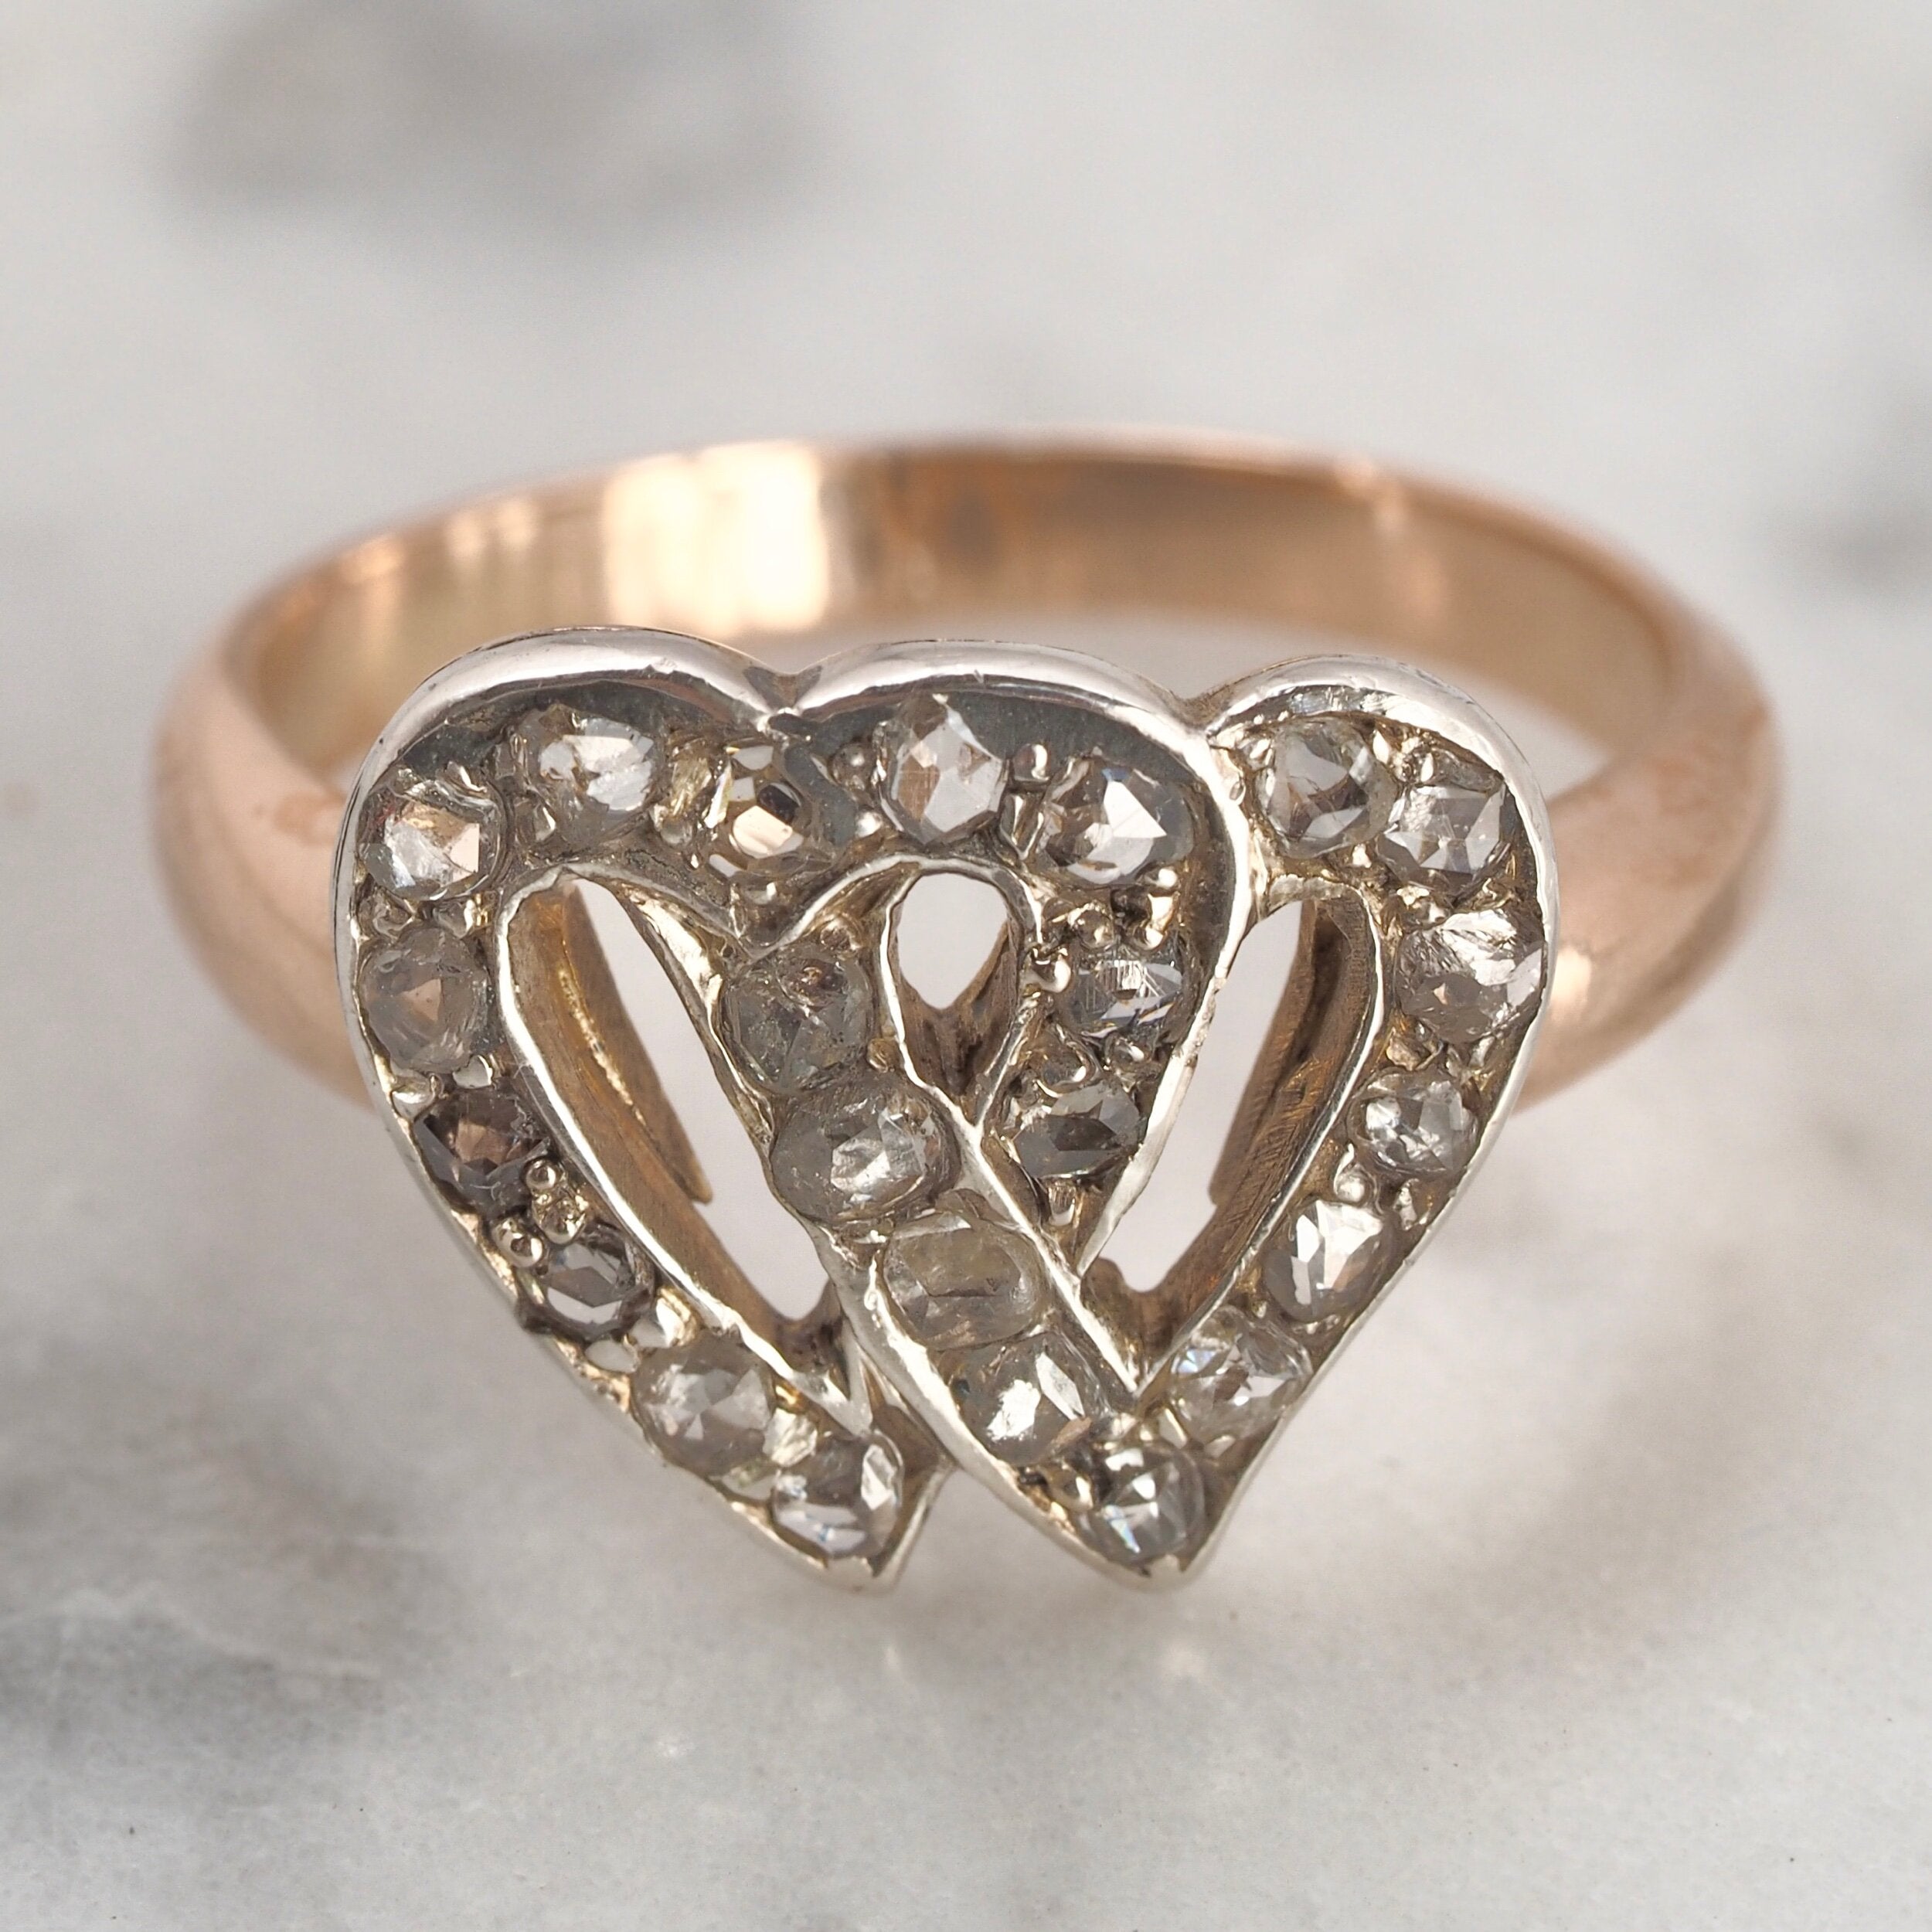 Antique Early Victorian 14k Gold Rose Cut Diamond Hearts Ring